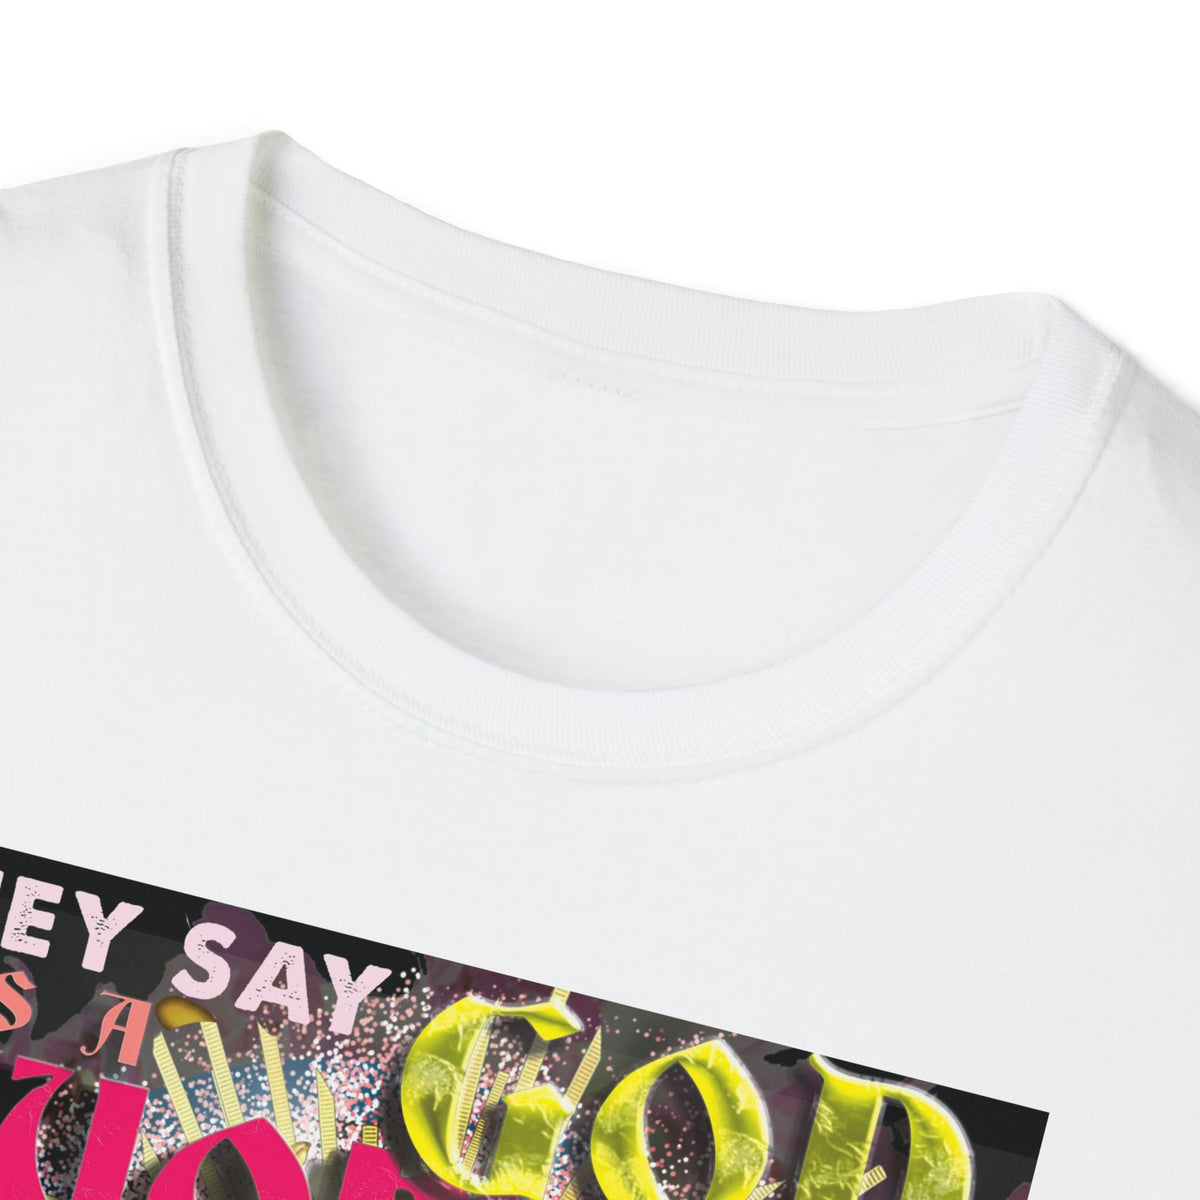 Sasha Colby - They Say God Is A Woman And I Am - Unisex Softstyle T-Shirt ,Fan Art, Drag Queen, Drag Race, Pop Culture, Comfy Tee